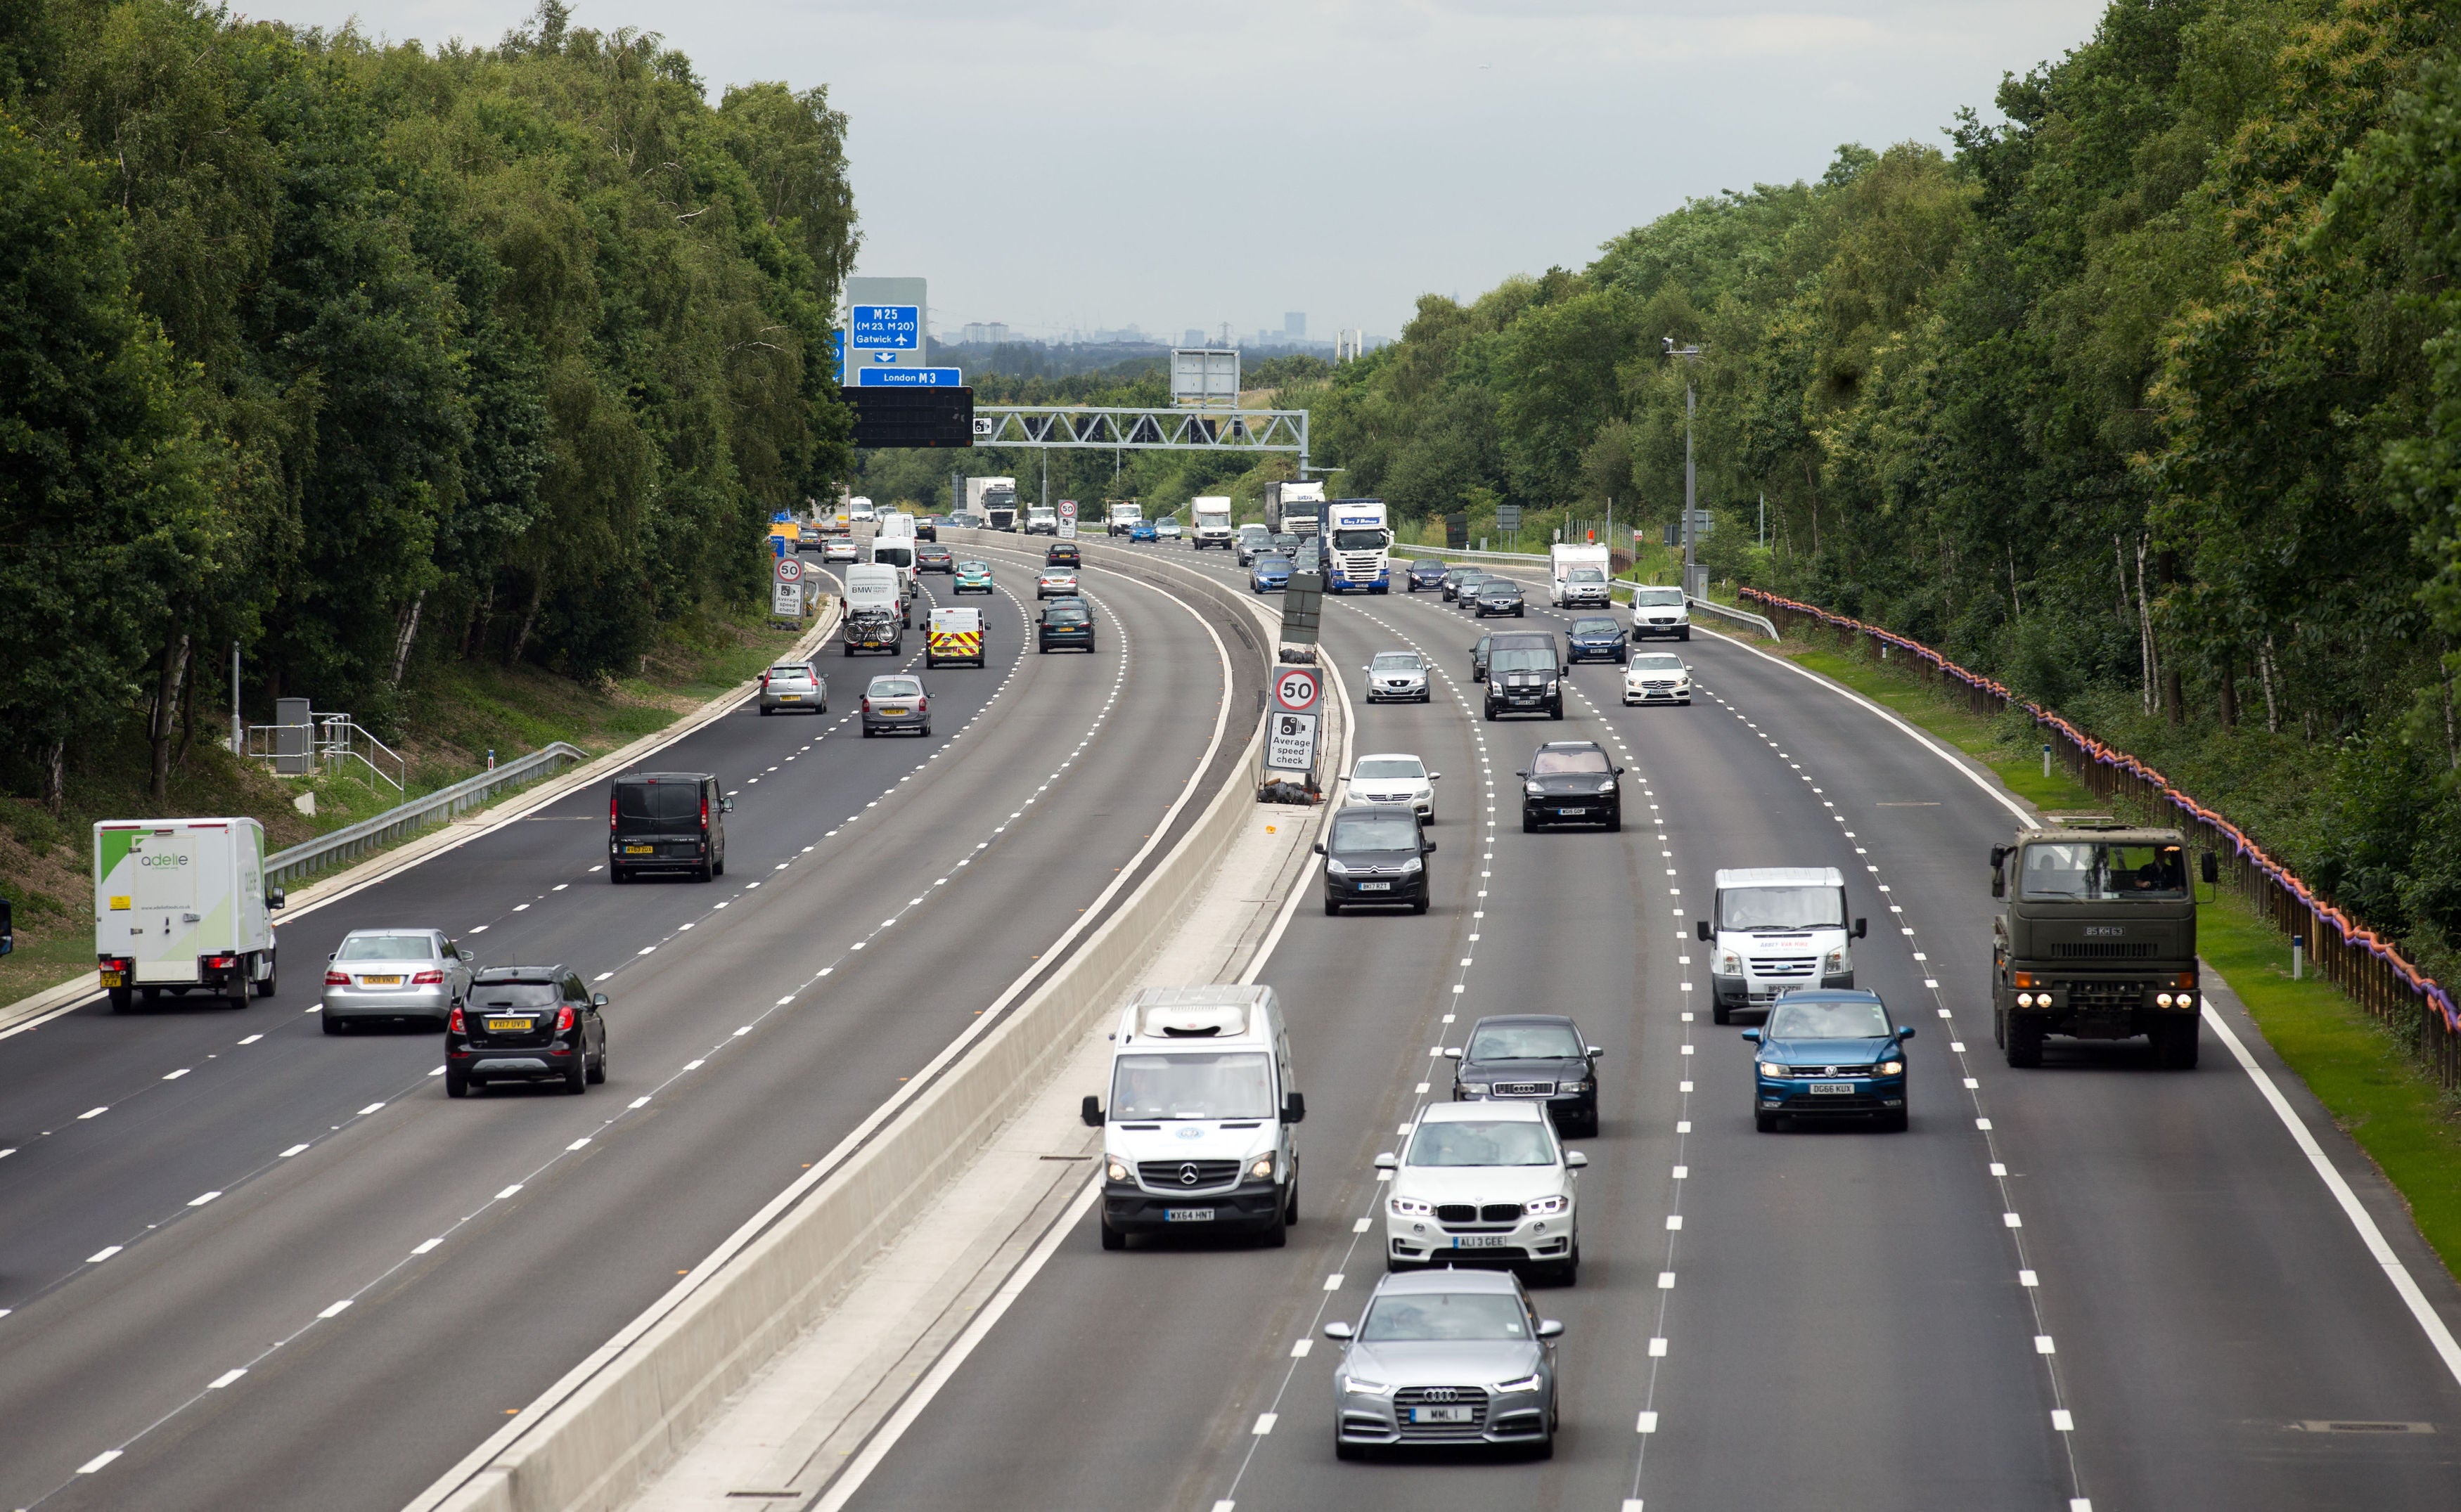 Drivers who break down on some smart motorway stretches are not being reached by traffic officers within a target response time, a regulator has warned (Steve Parsons/PA)